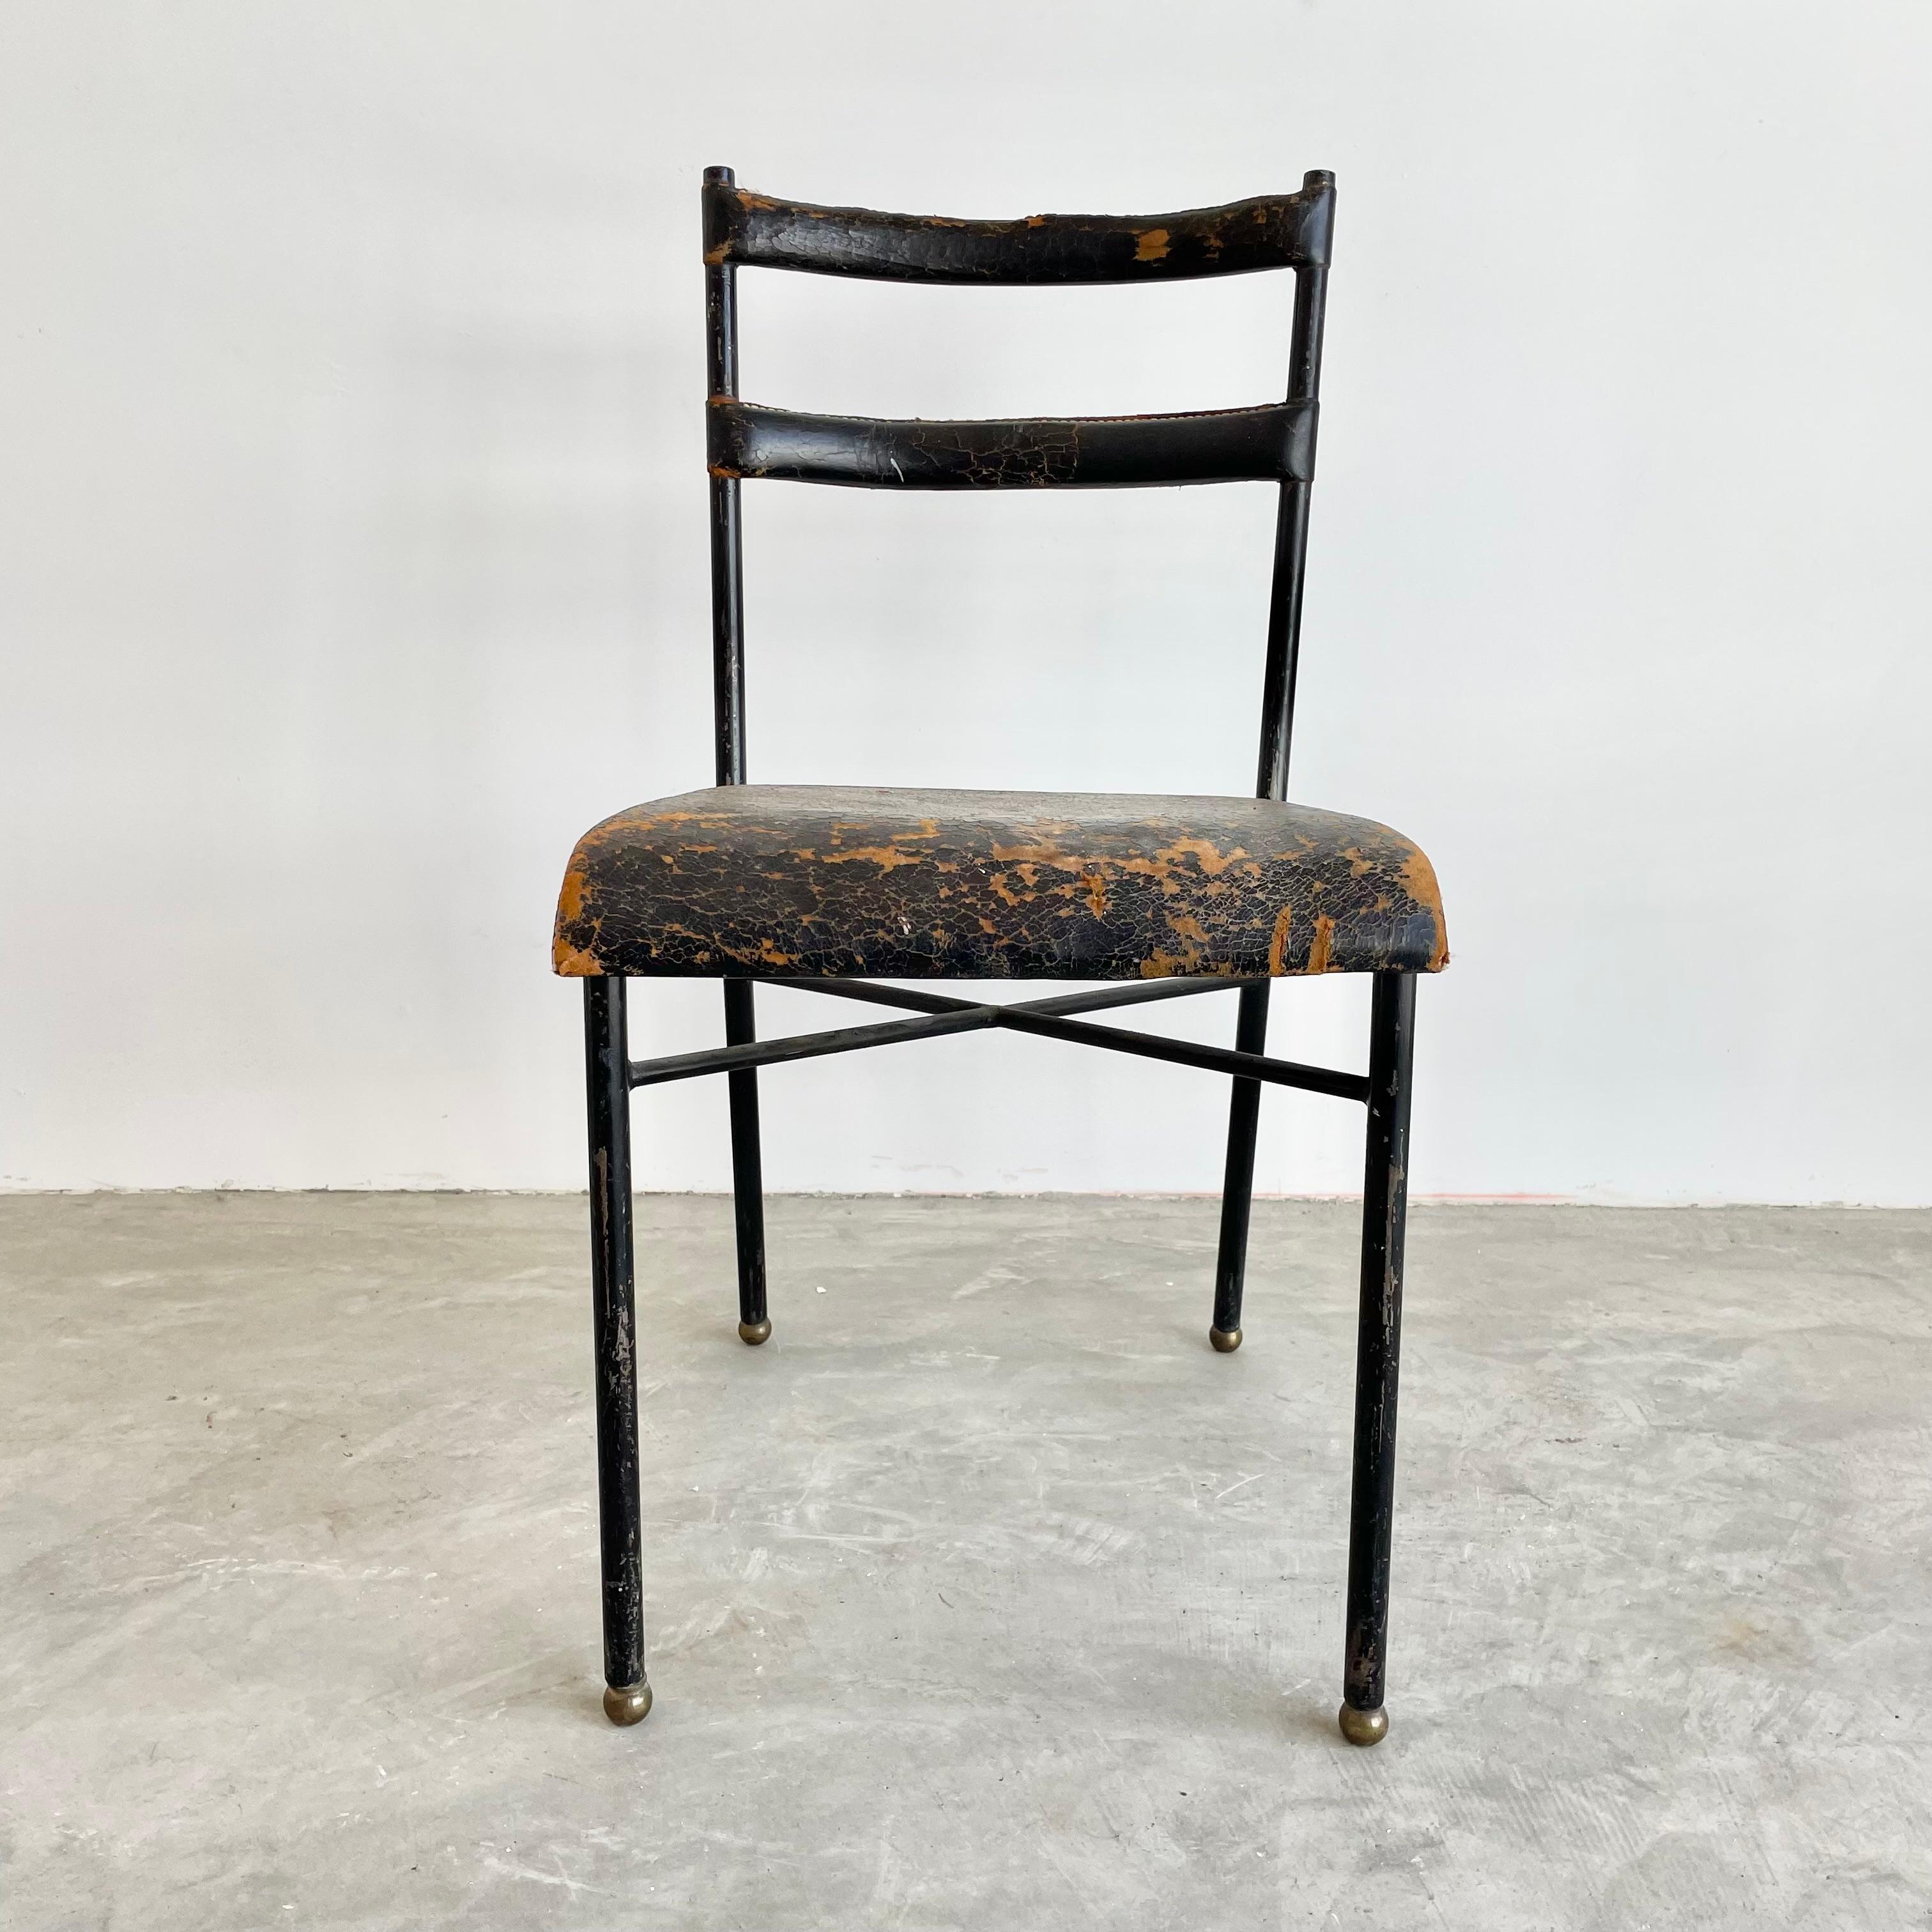 Original side chair by French designer Jacques Adnet. Iron frame with black leather seat and seat back. Signature Adnet contrast stitching throughout as well as brass ball feet. Completely original and unrestored. Wear as shown. Great piece of